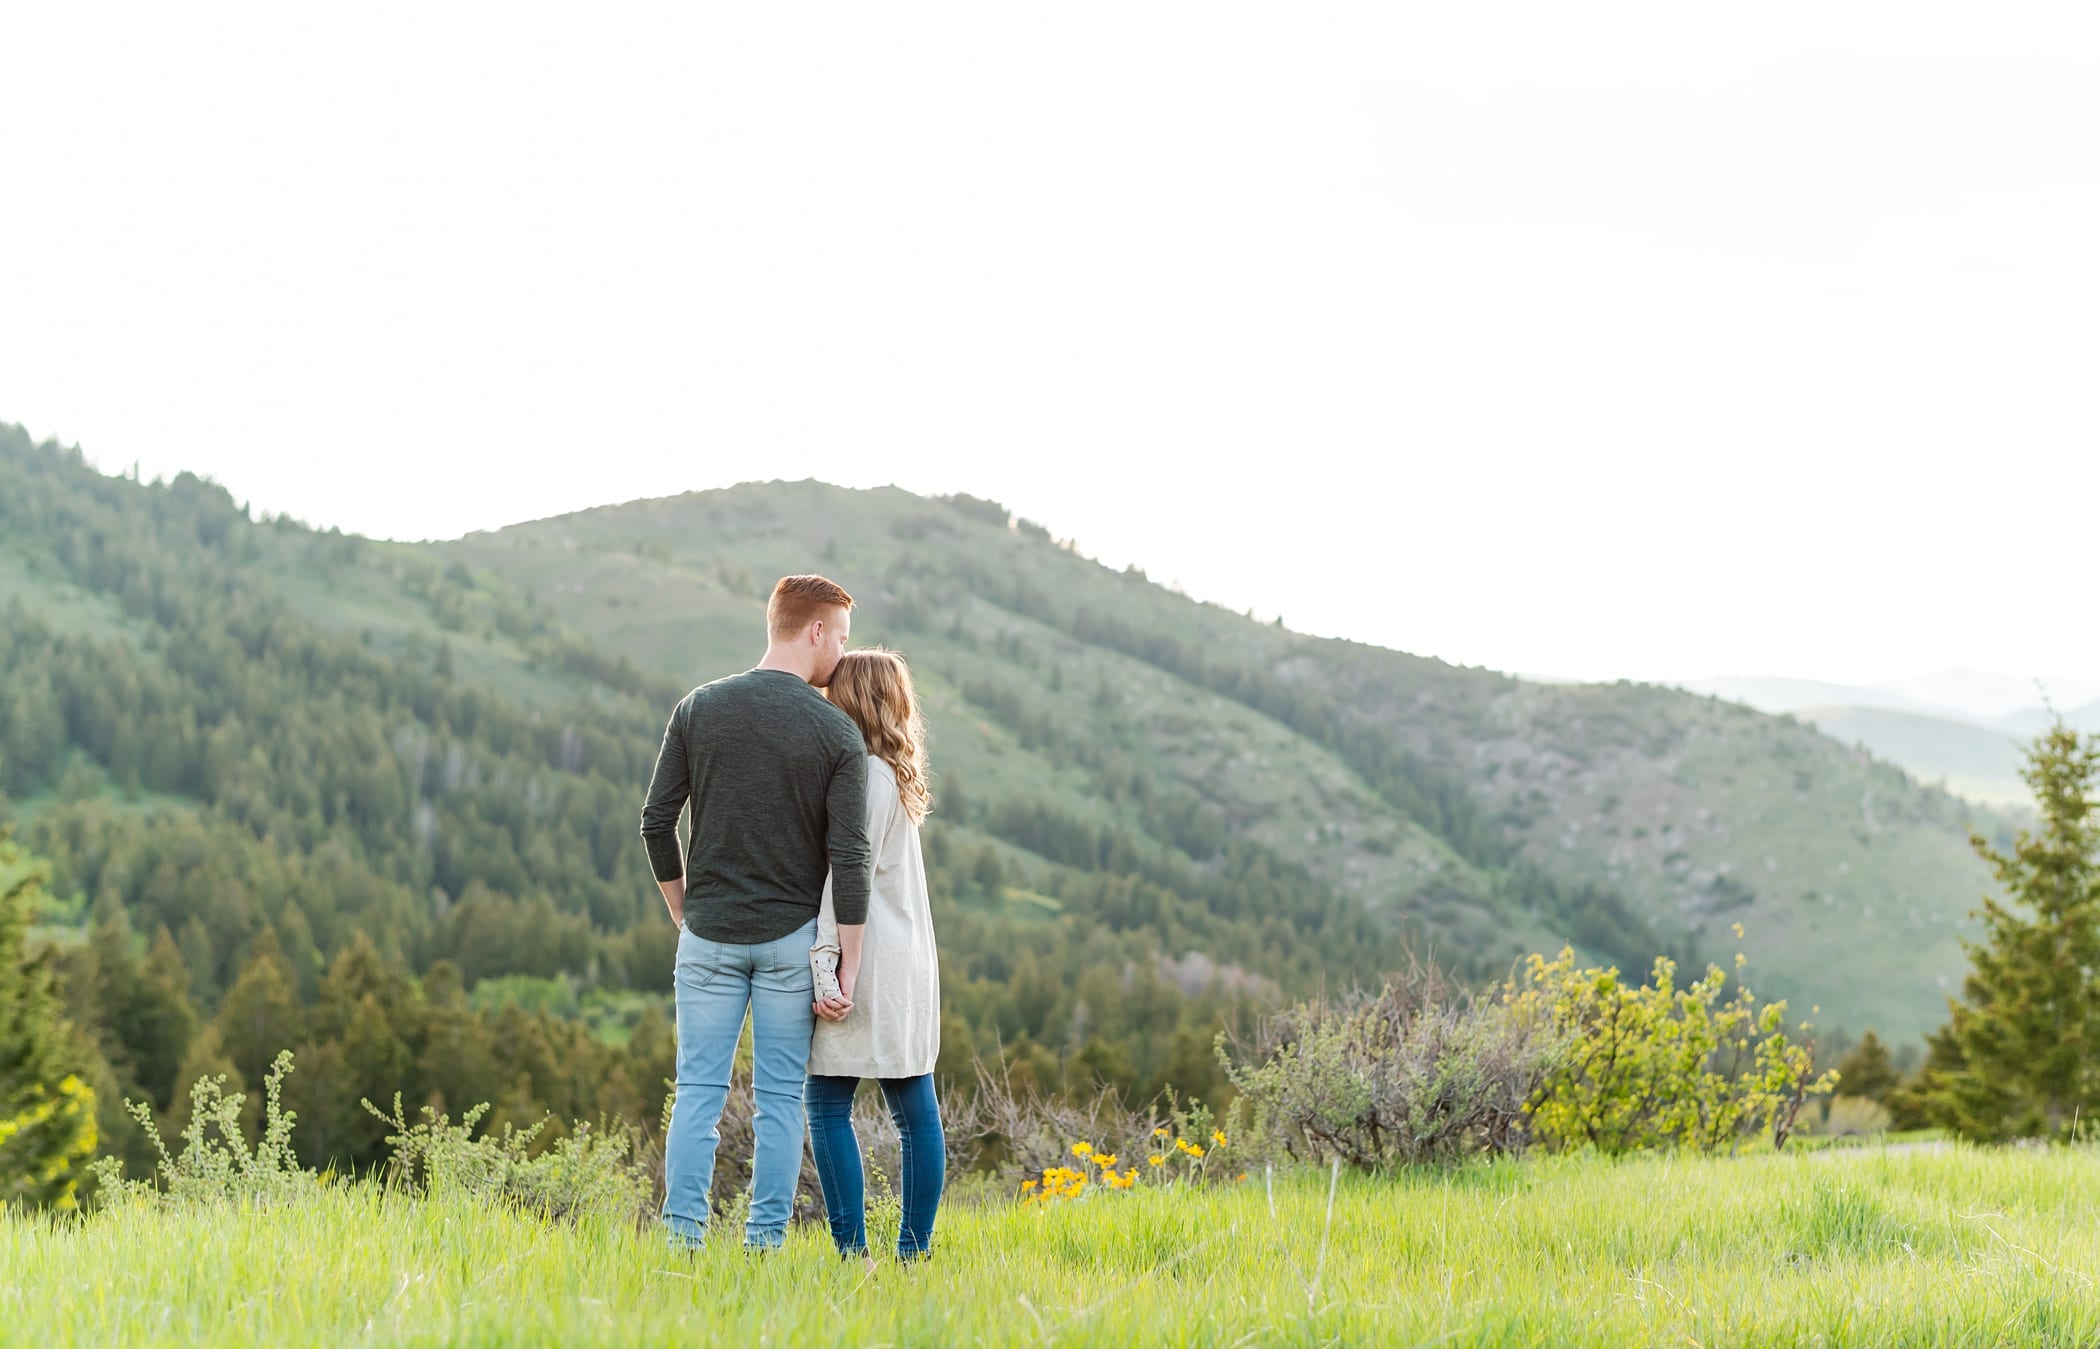 Mountain top scenery for engagement photos